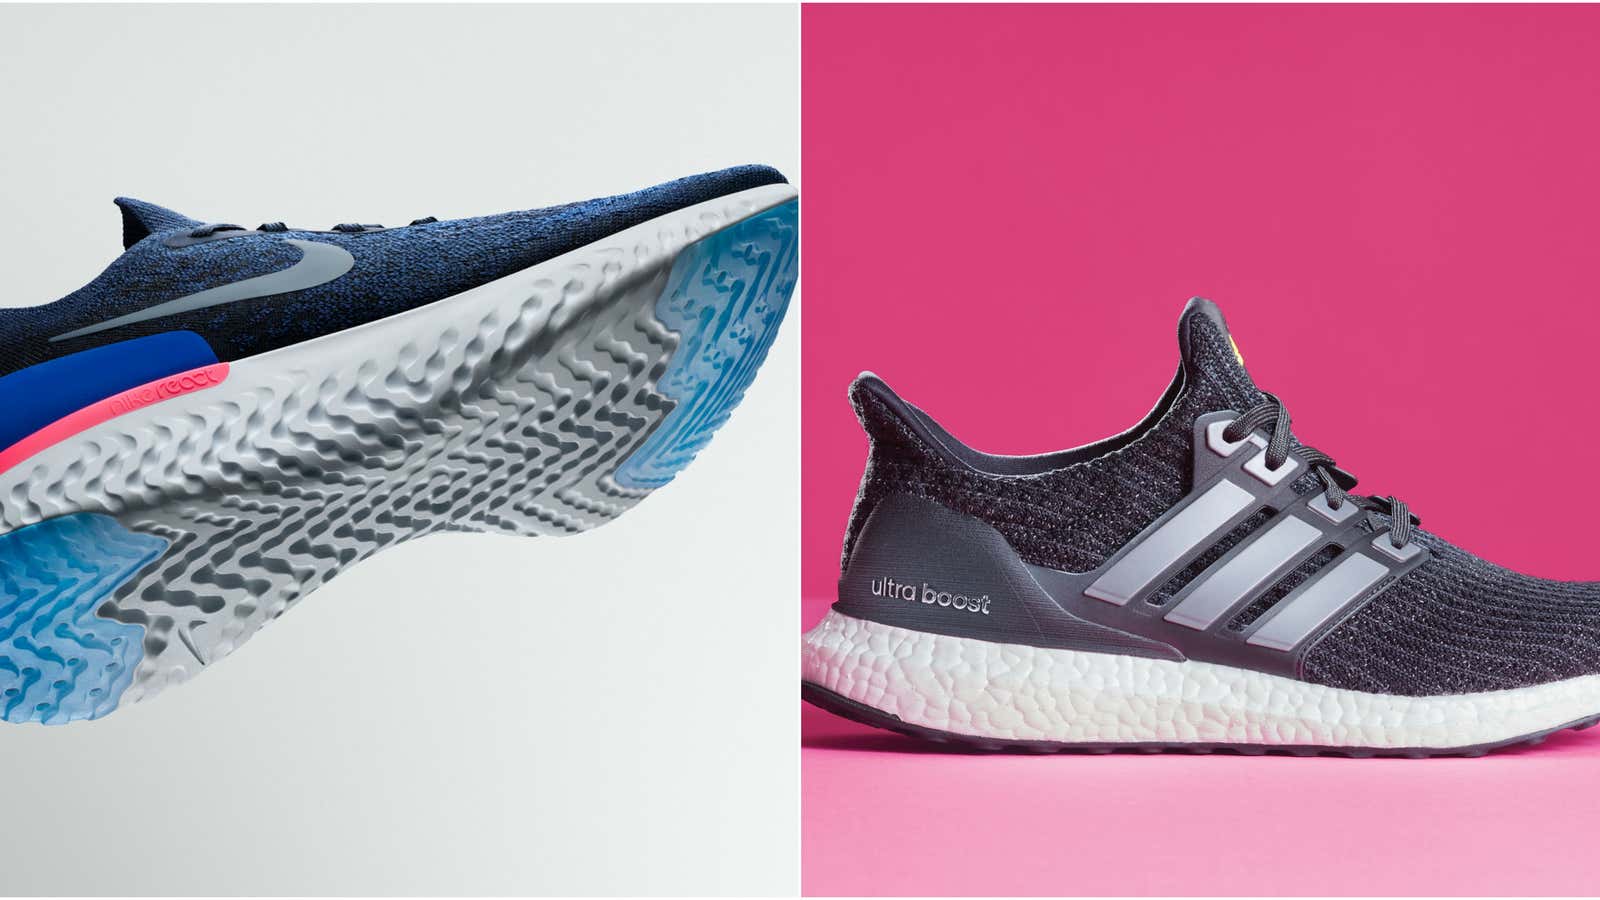 The Nike Epic React and Adidas UltraBoost go head-to-head.